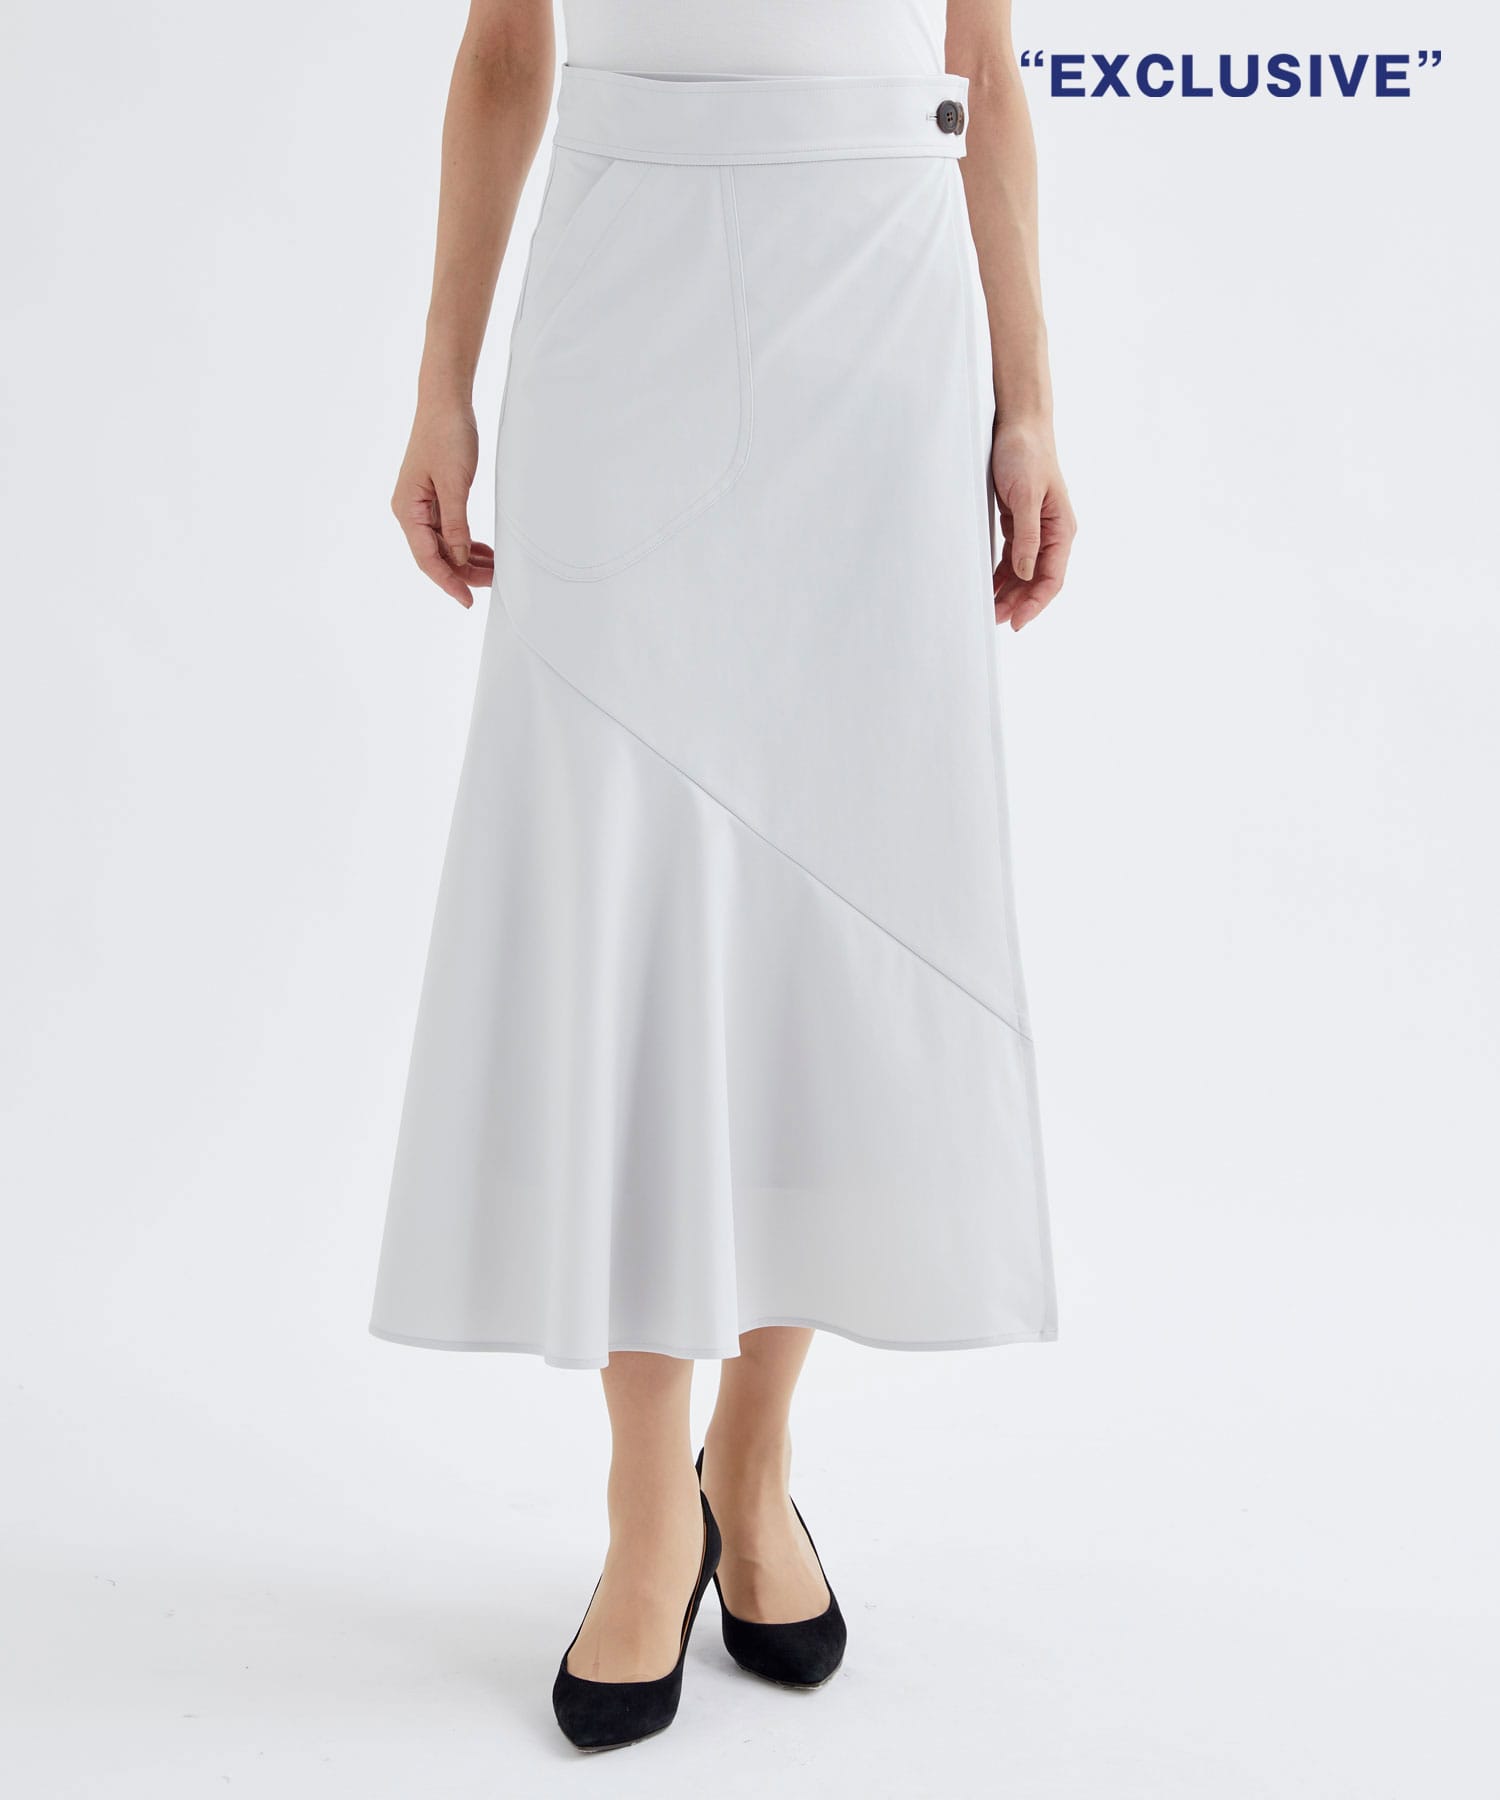 WASHABLE HIGH FANCTION JERSEY WRAP SKIRT